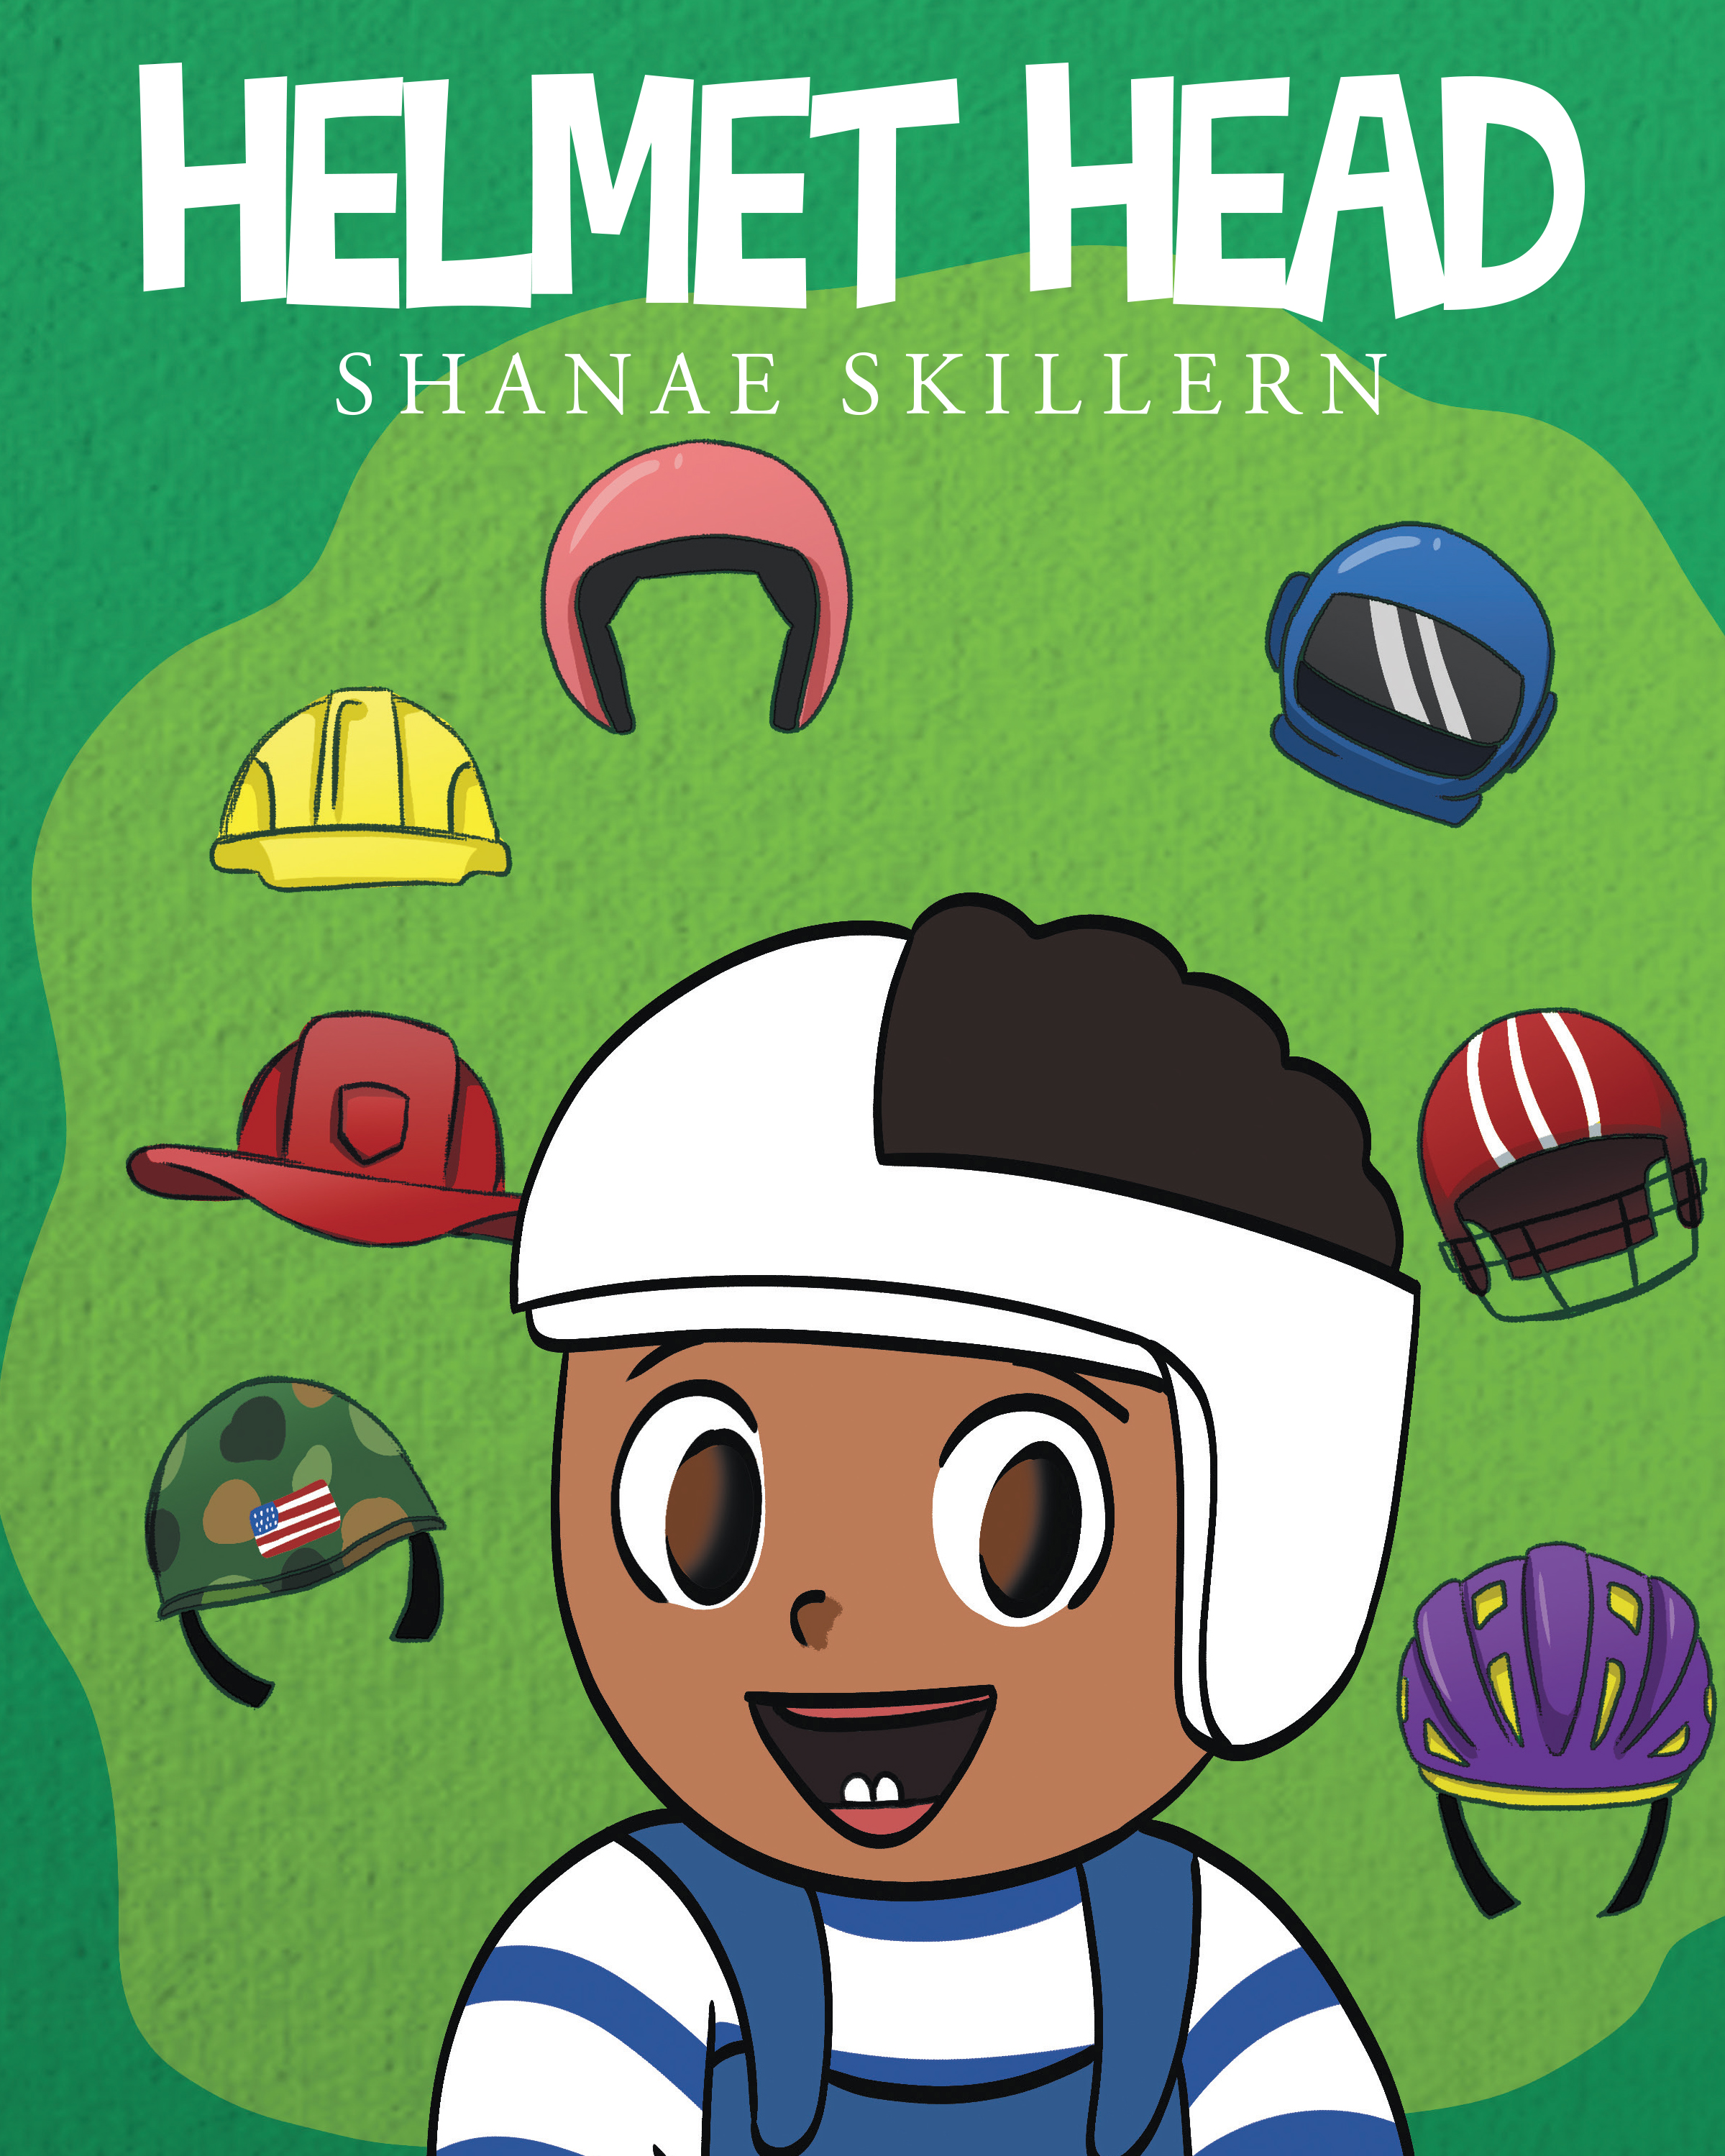 Shanae Skillern’s Newly Released "Helmet Head" is an Uplifting and Compassionate Narrative for Young Readers